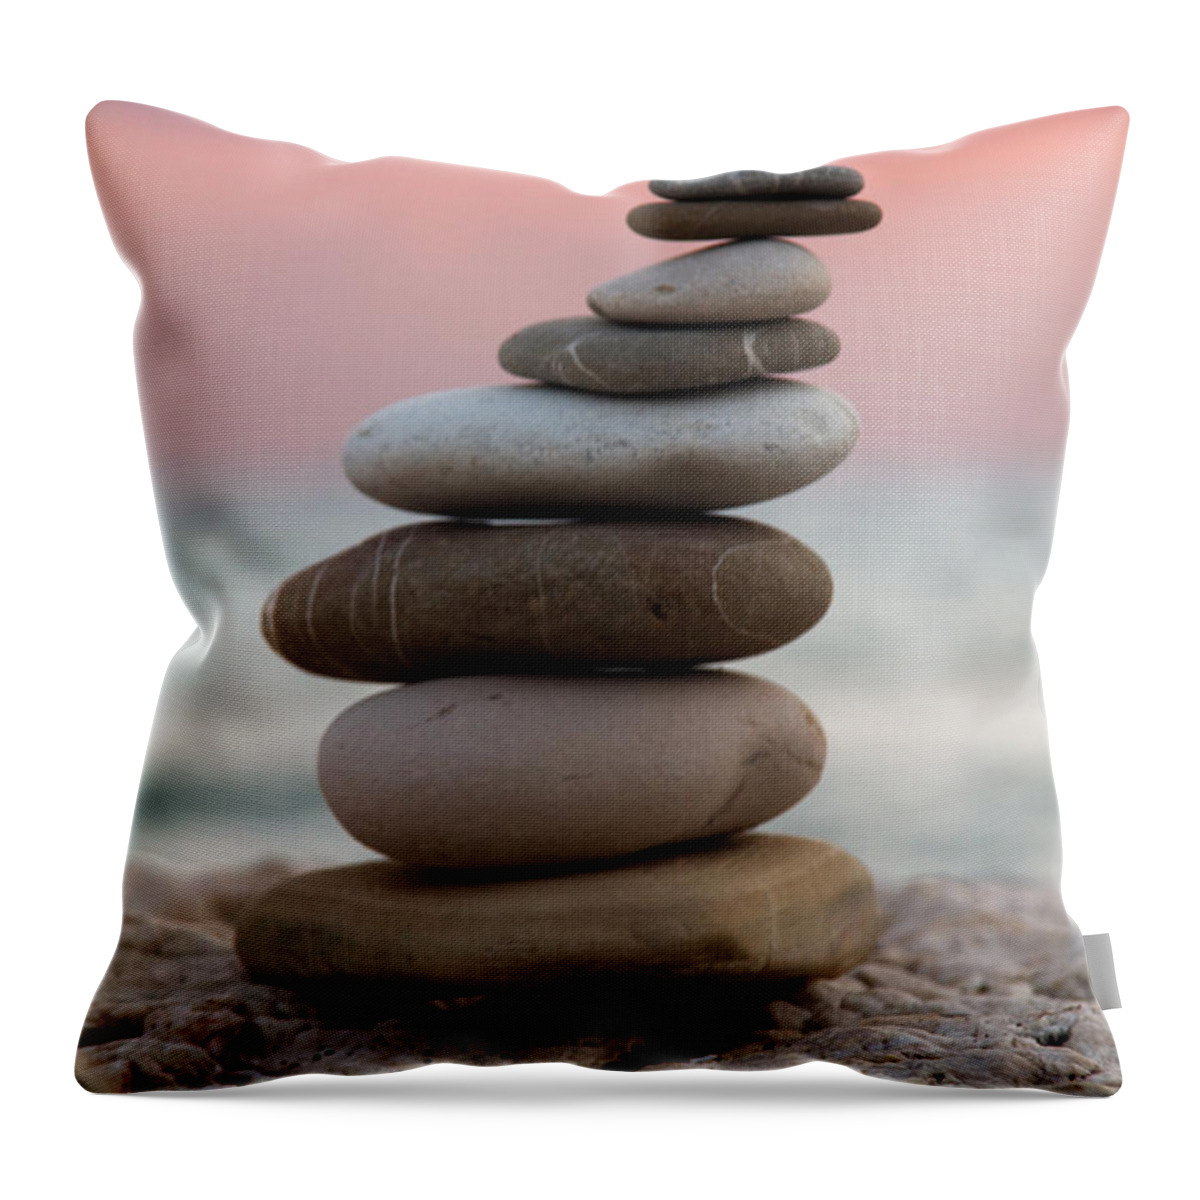 Arrangement Background Balance Beach Beauty Blue Building Color Colour Concept Concepts Construction Design Energy Group Heap Isolated Life Light Natural Nature Ocean Outdoor Pattern Peace Pebble Relax Rock Sand Scene Sea Shape Simplicity Sky Spa Space Stability Stack Stone Summer Sun Top Tower Tranquil Travel Vacation Water White Zen Throw Pillow featuring the photograph Balance by Stelios Kleanthous